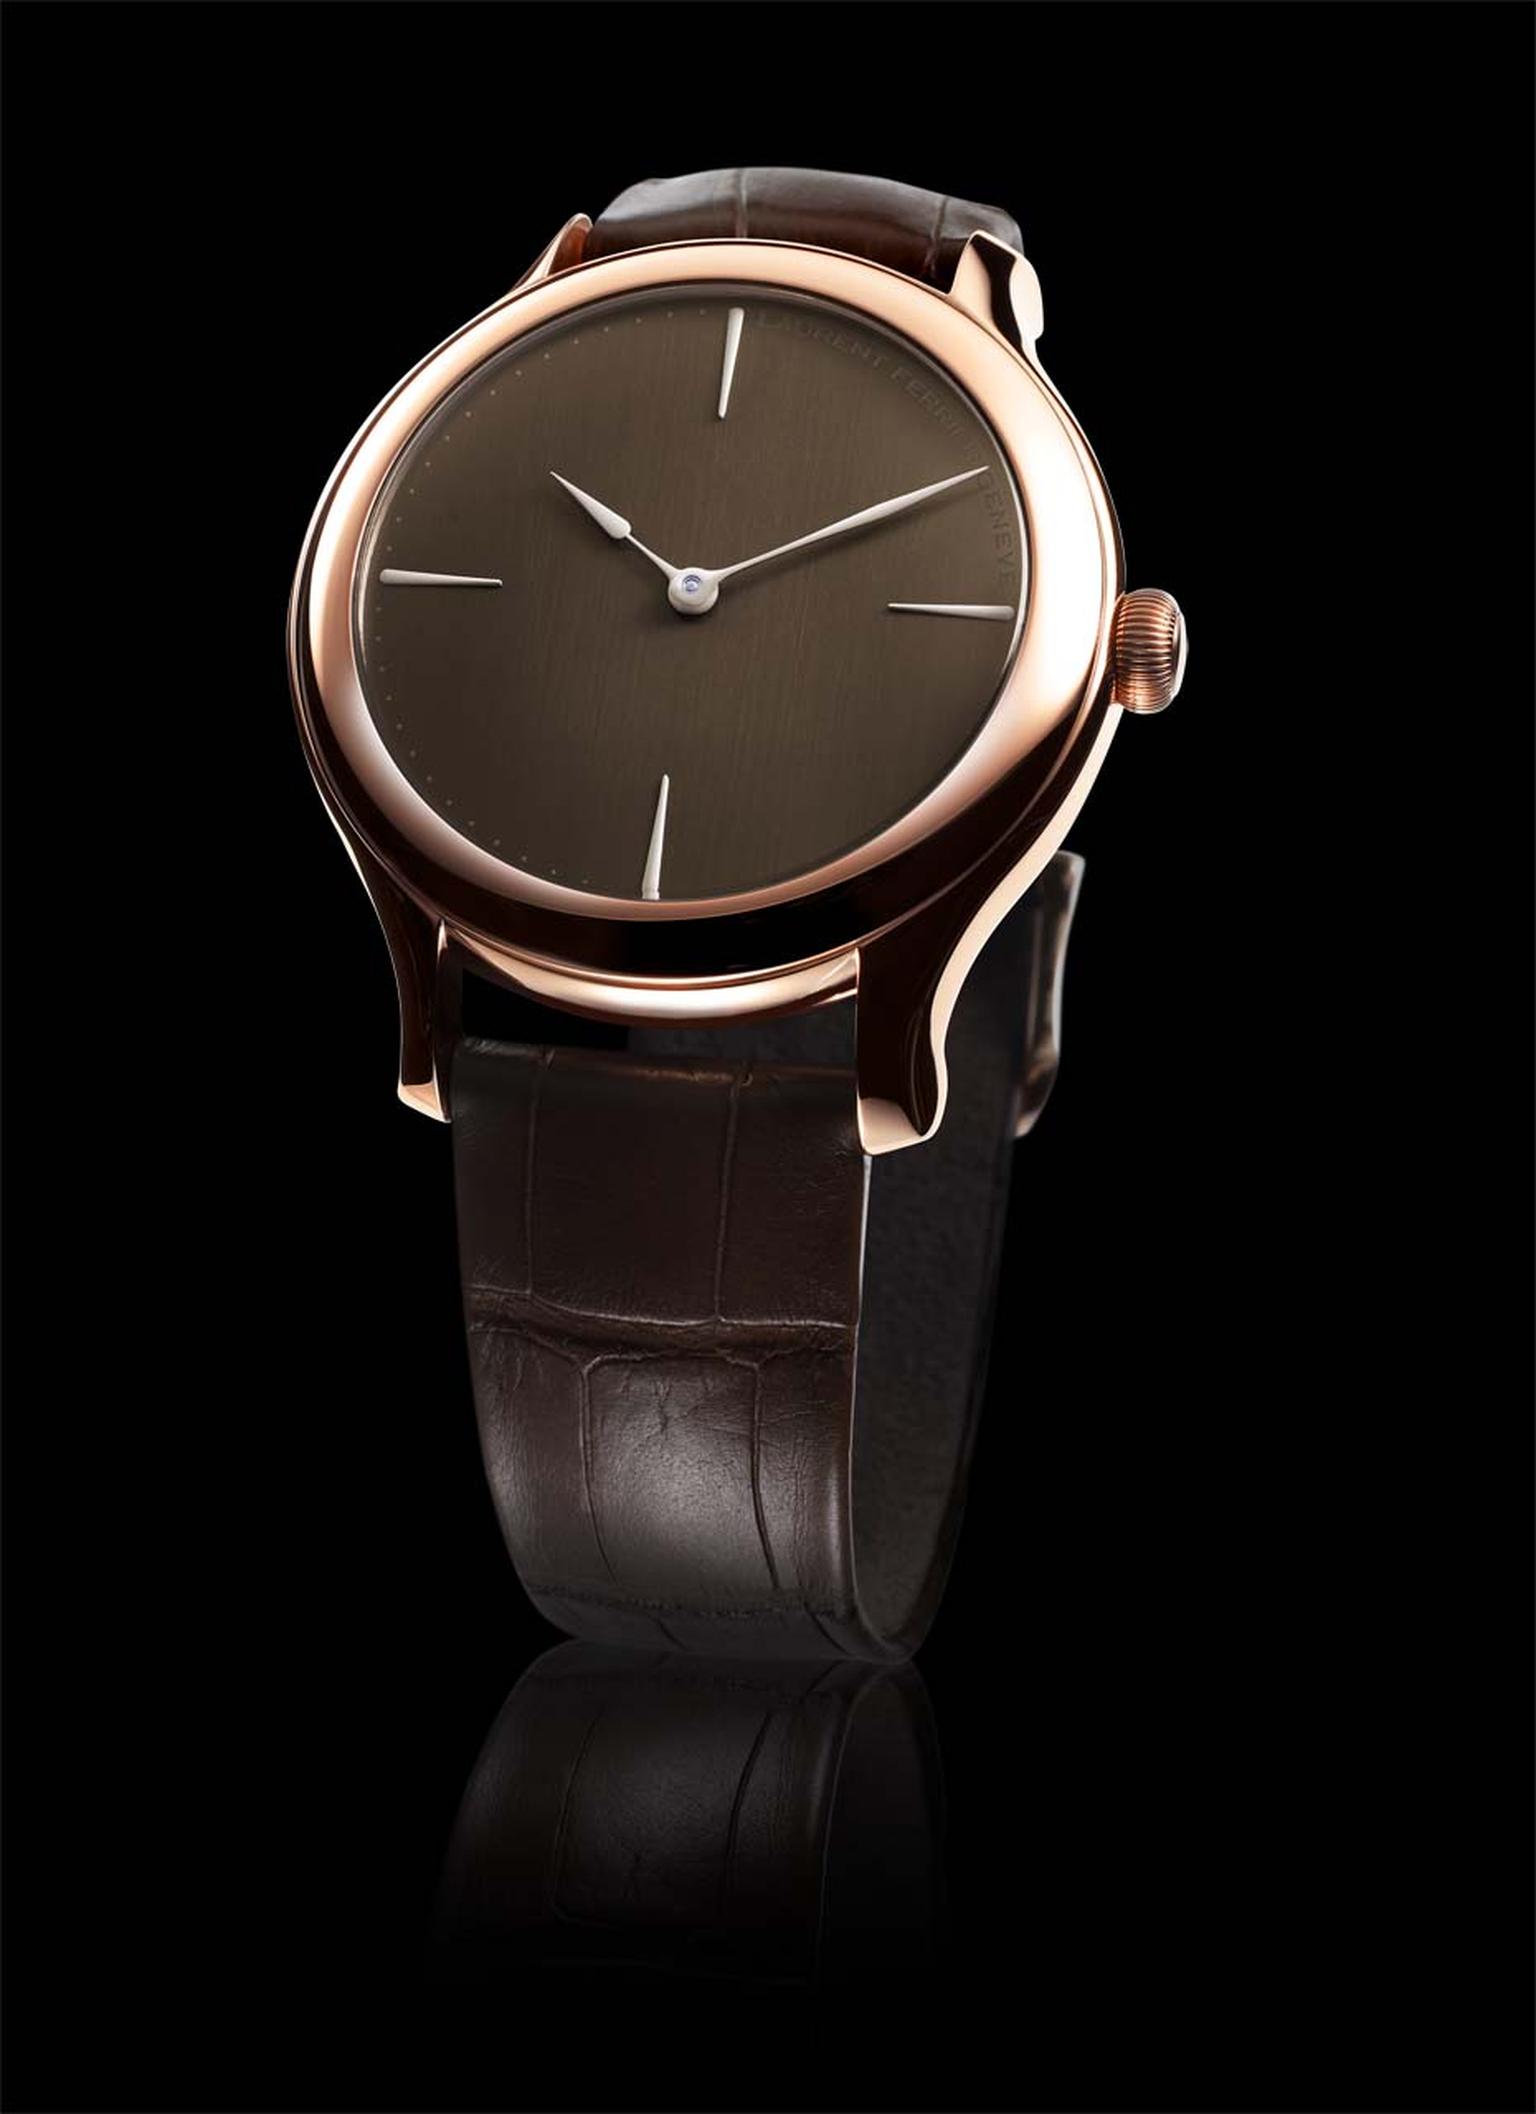 Laurent Ferrier Galet Micro-Rotor Chocolate 39mm rose gold watch. With its minimalist dial that is rich in texture and colour, it is almost good enough to eat. Inside the smooth round case is a superlative Laurent Ferrier movement with an 80-hour power re